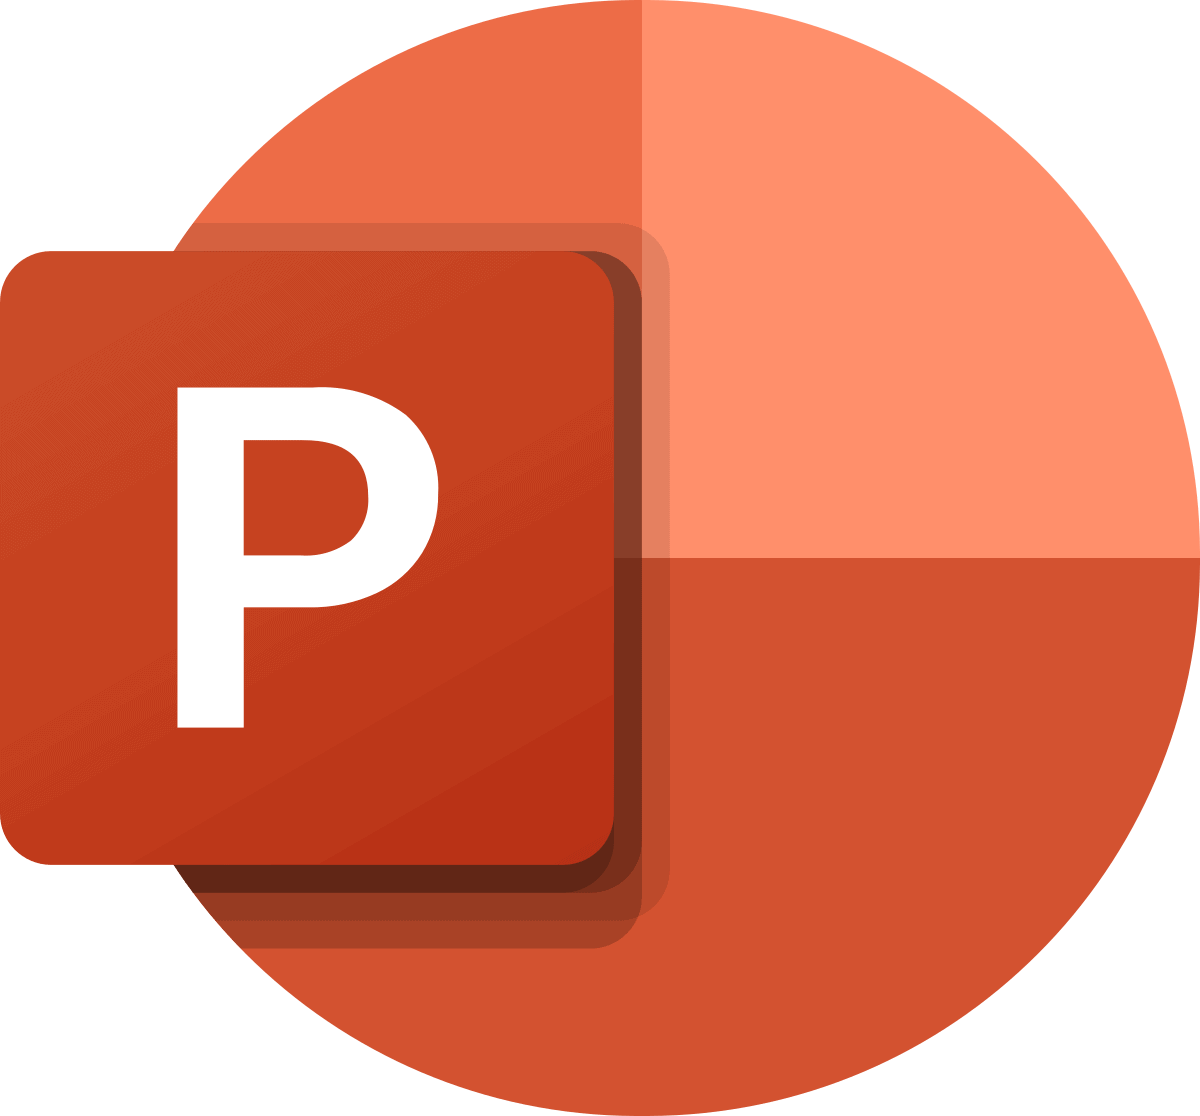 Microsoft starts testing new ‘Portrait mode’ feature in PowerPoint on iOS